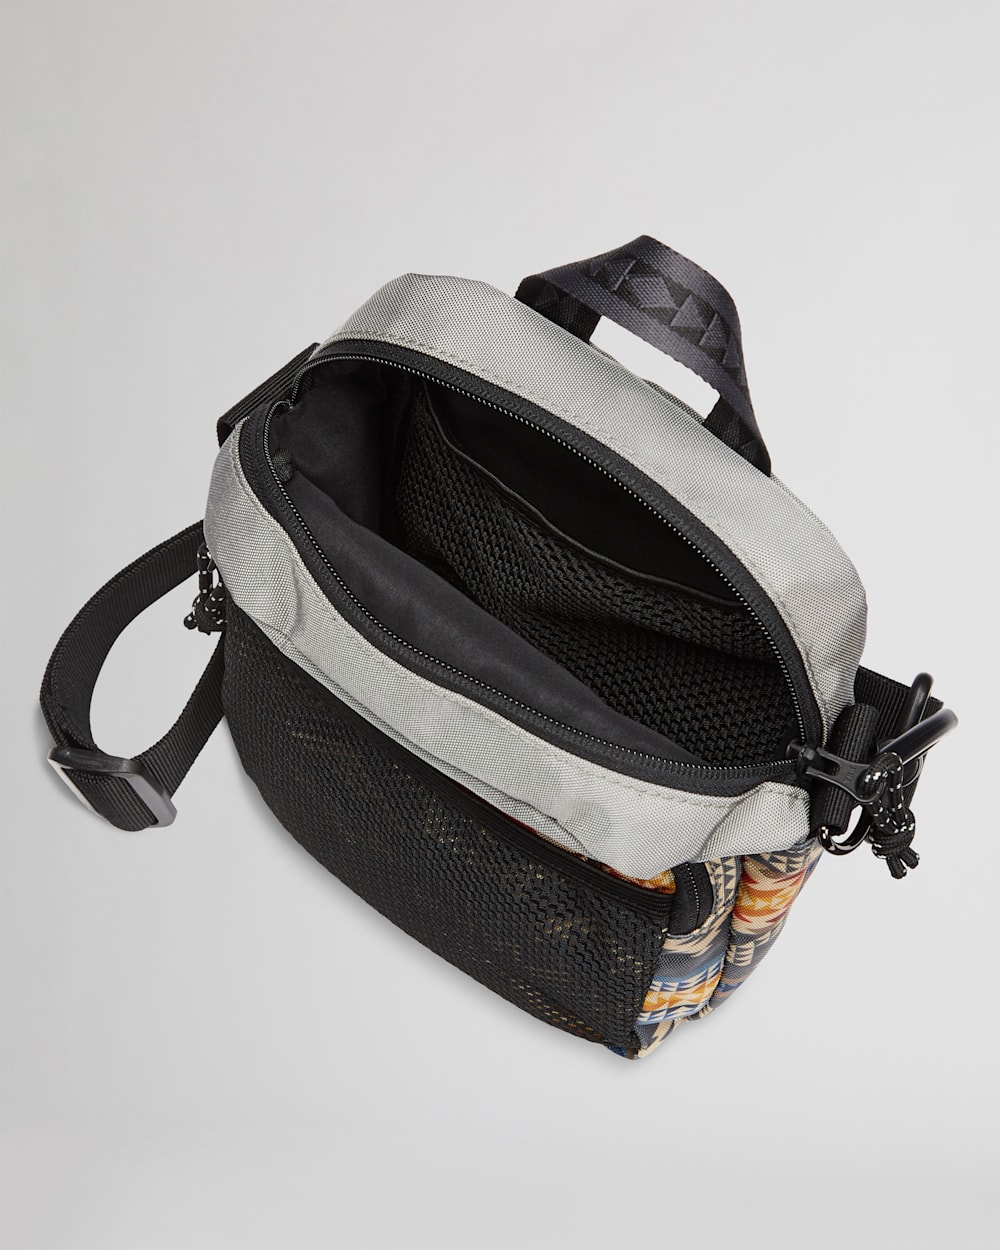 ALTERNATE VIEW OF SMITH ROCK CROSSBODY IN GREY image number 3